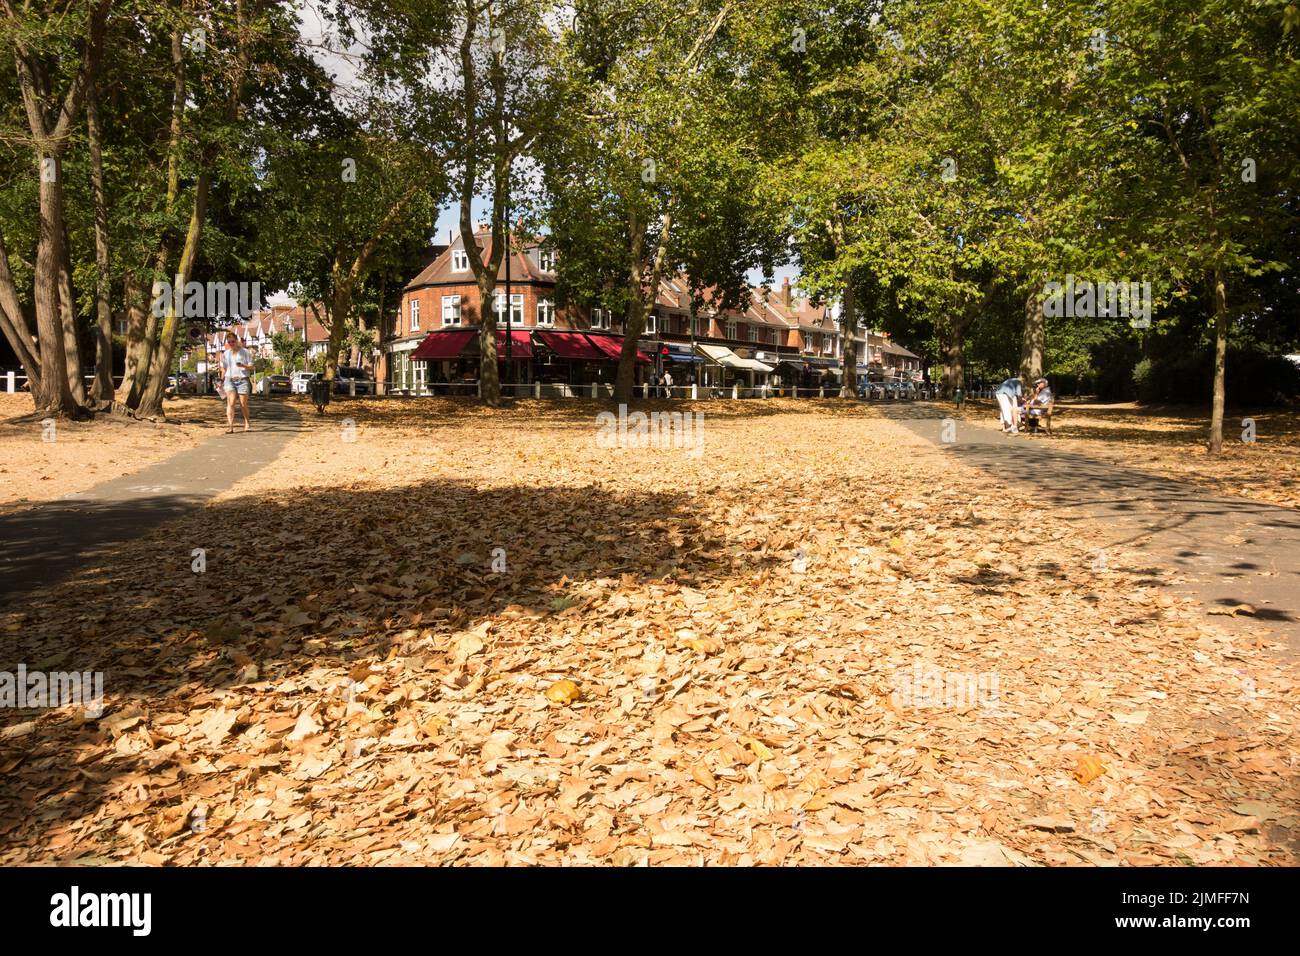 Drought-induced parched grass and leaf fall on Barnes Common, Barnes, London, SW13, England, UK Stock Photo